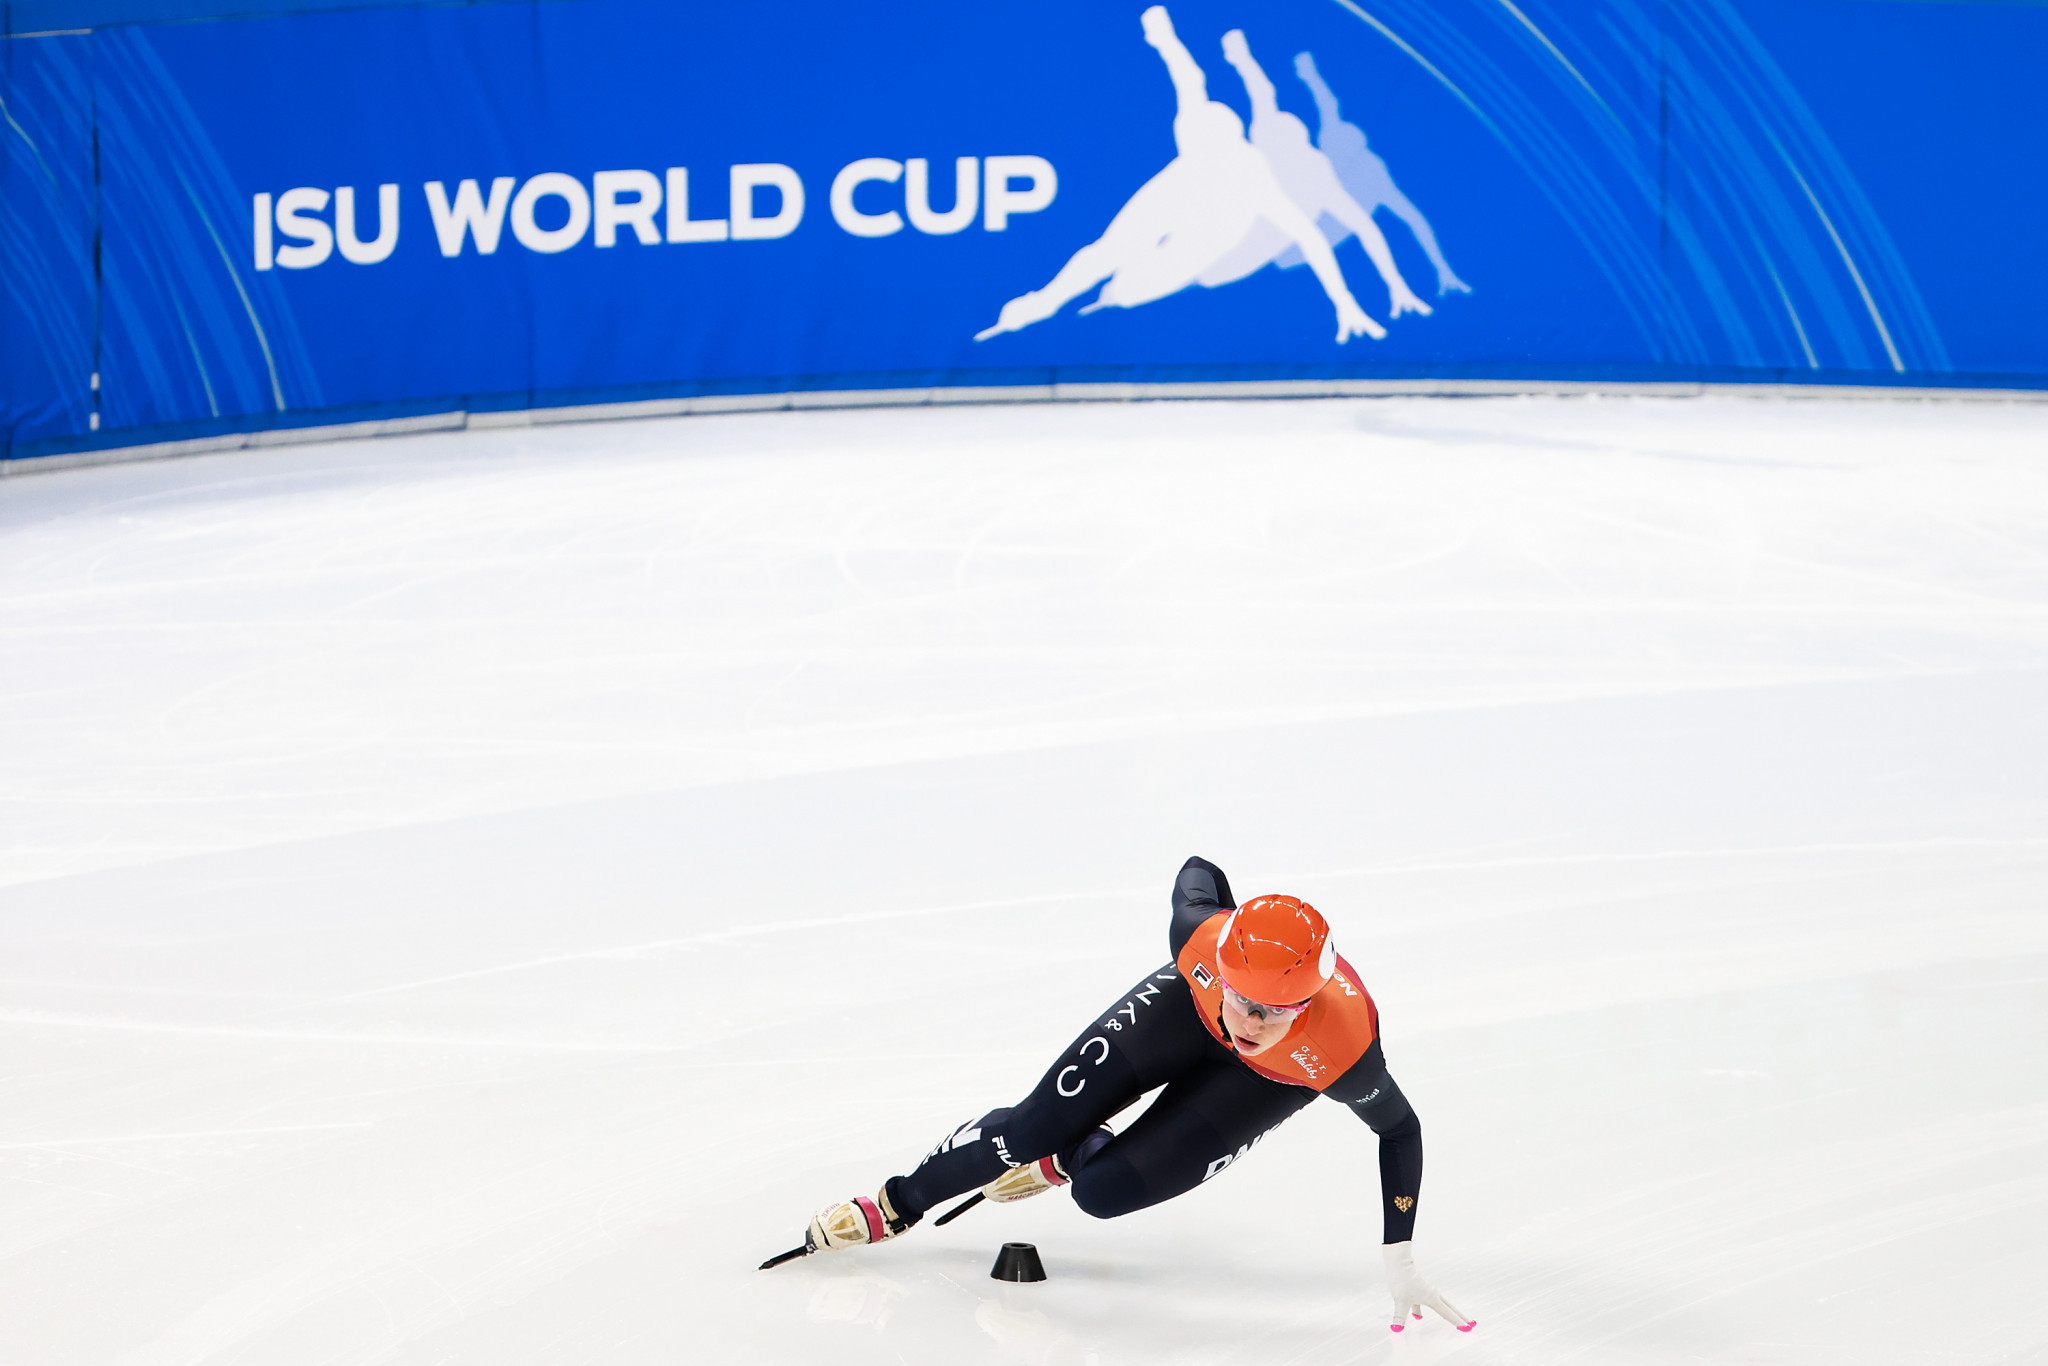 Suzanne Schulting of the Netherlands won the overall women's title at this year's European Short Track Speed Skating Championships in Gdansk ©Getty Images 